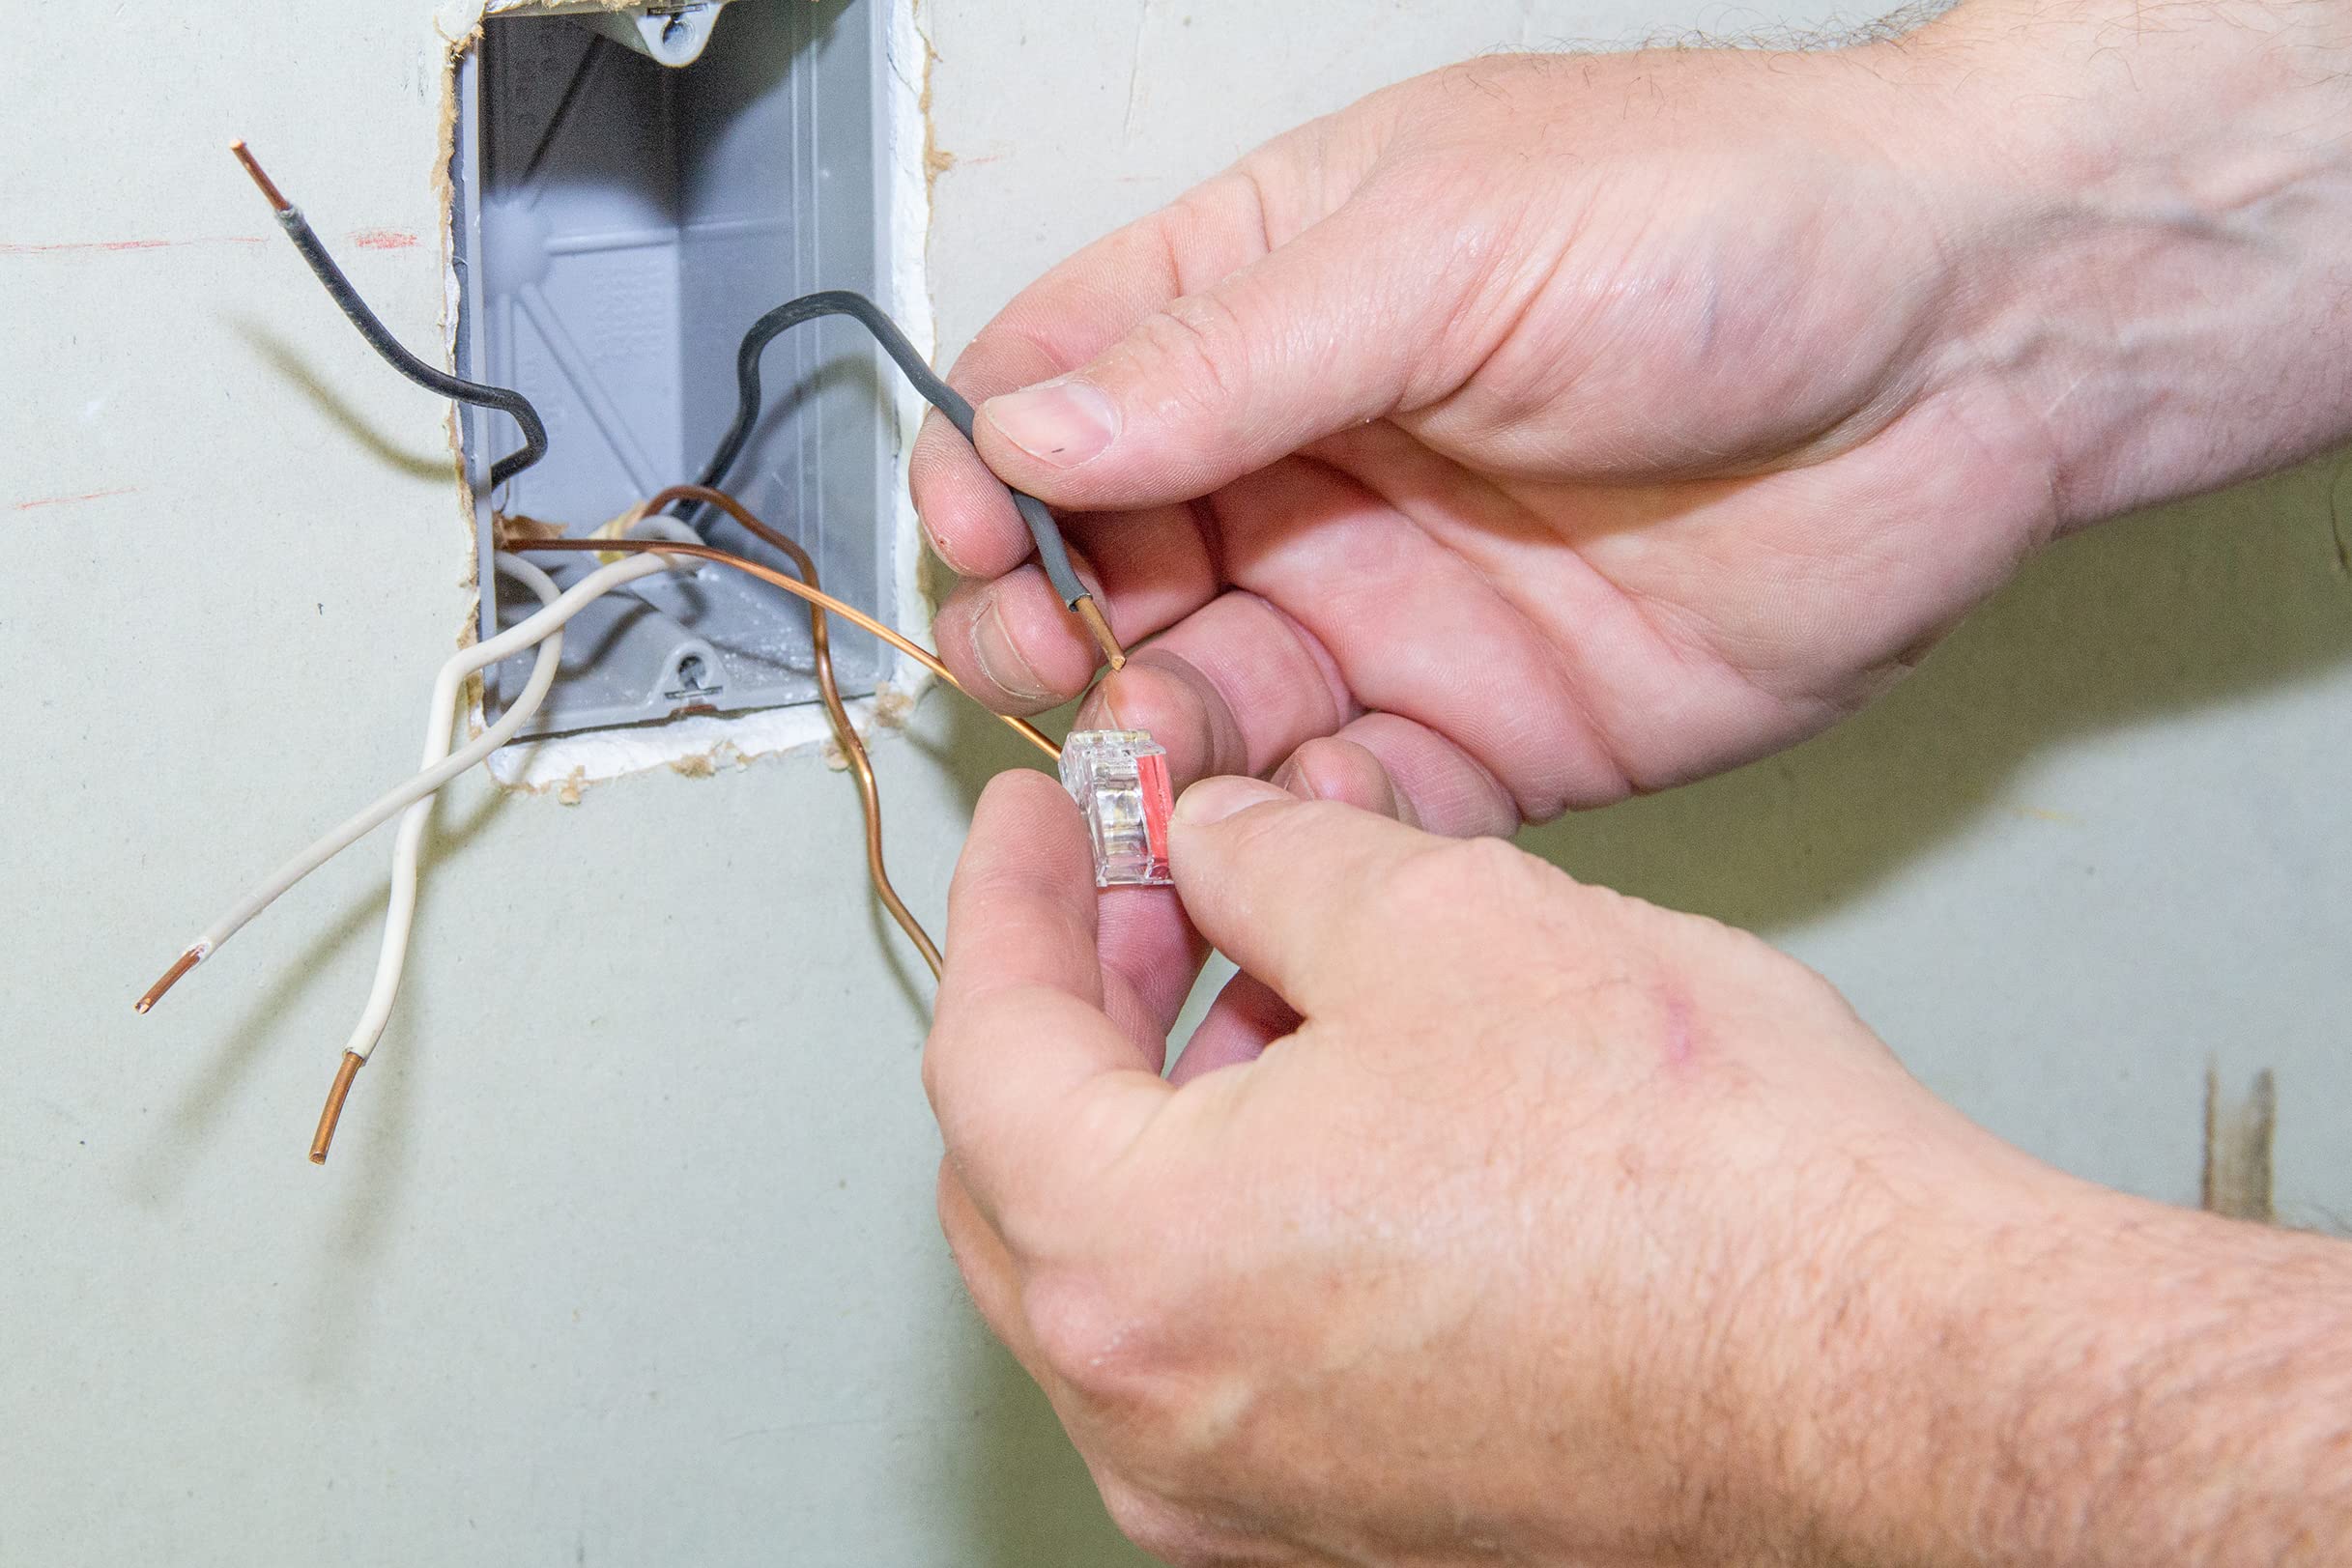 How To Remove Electrical Wire From Push-In Connector